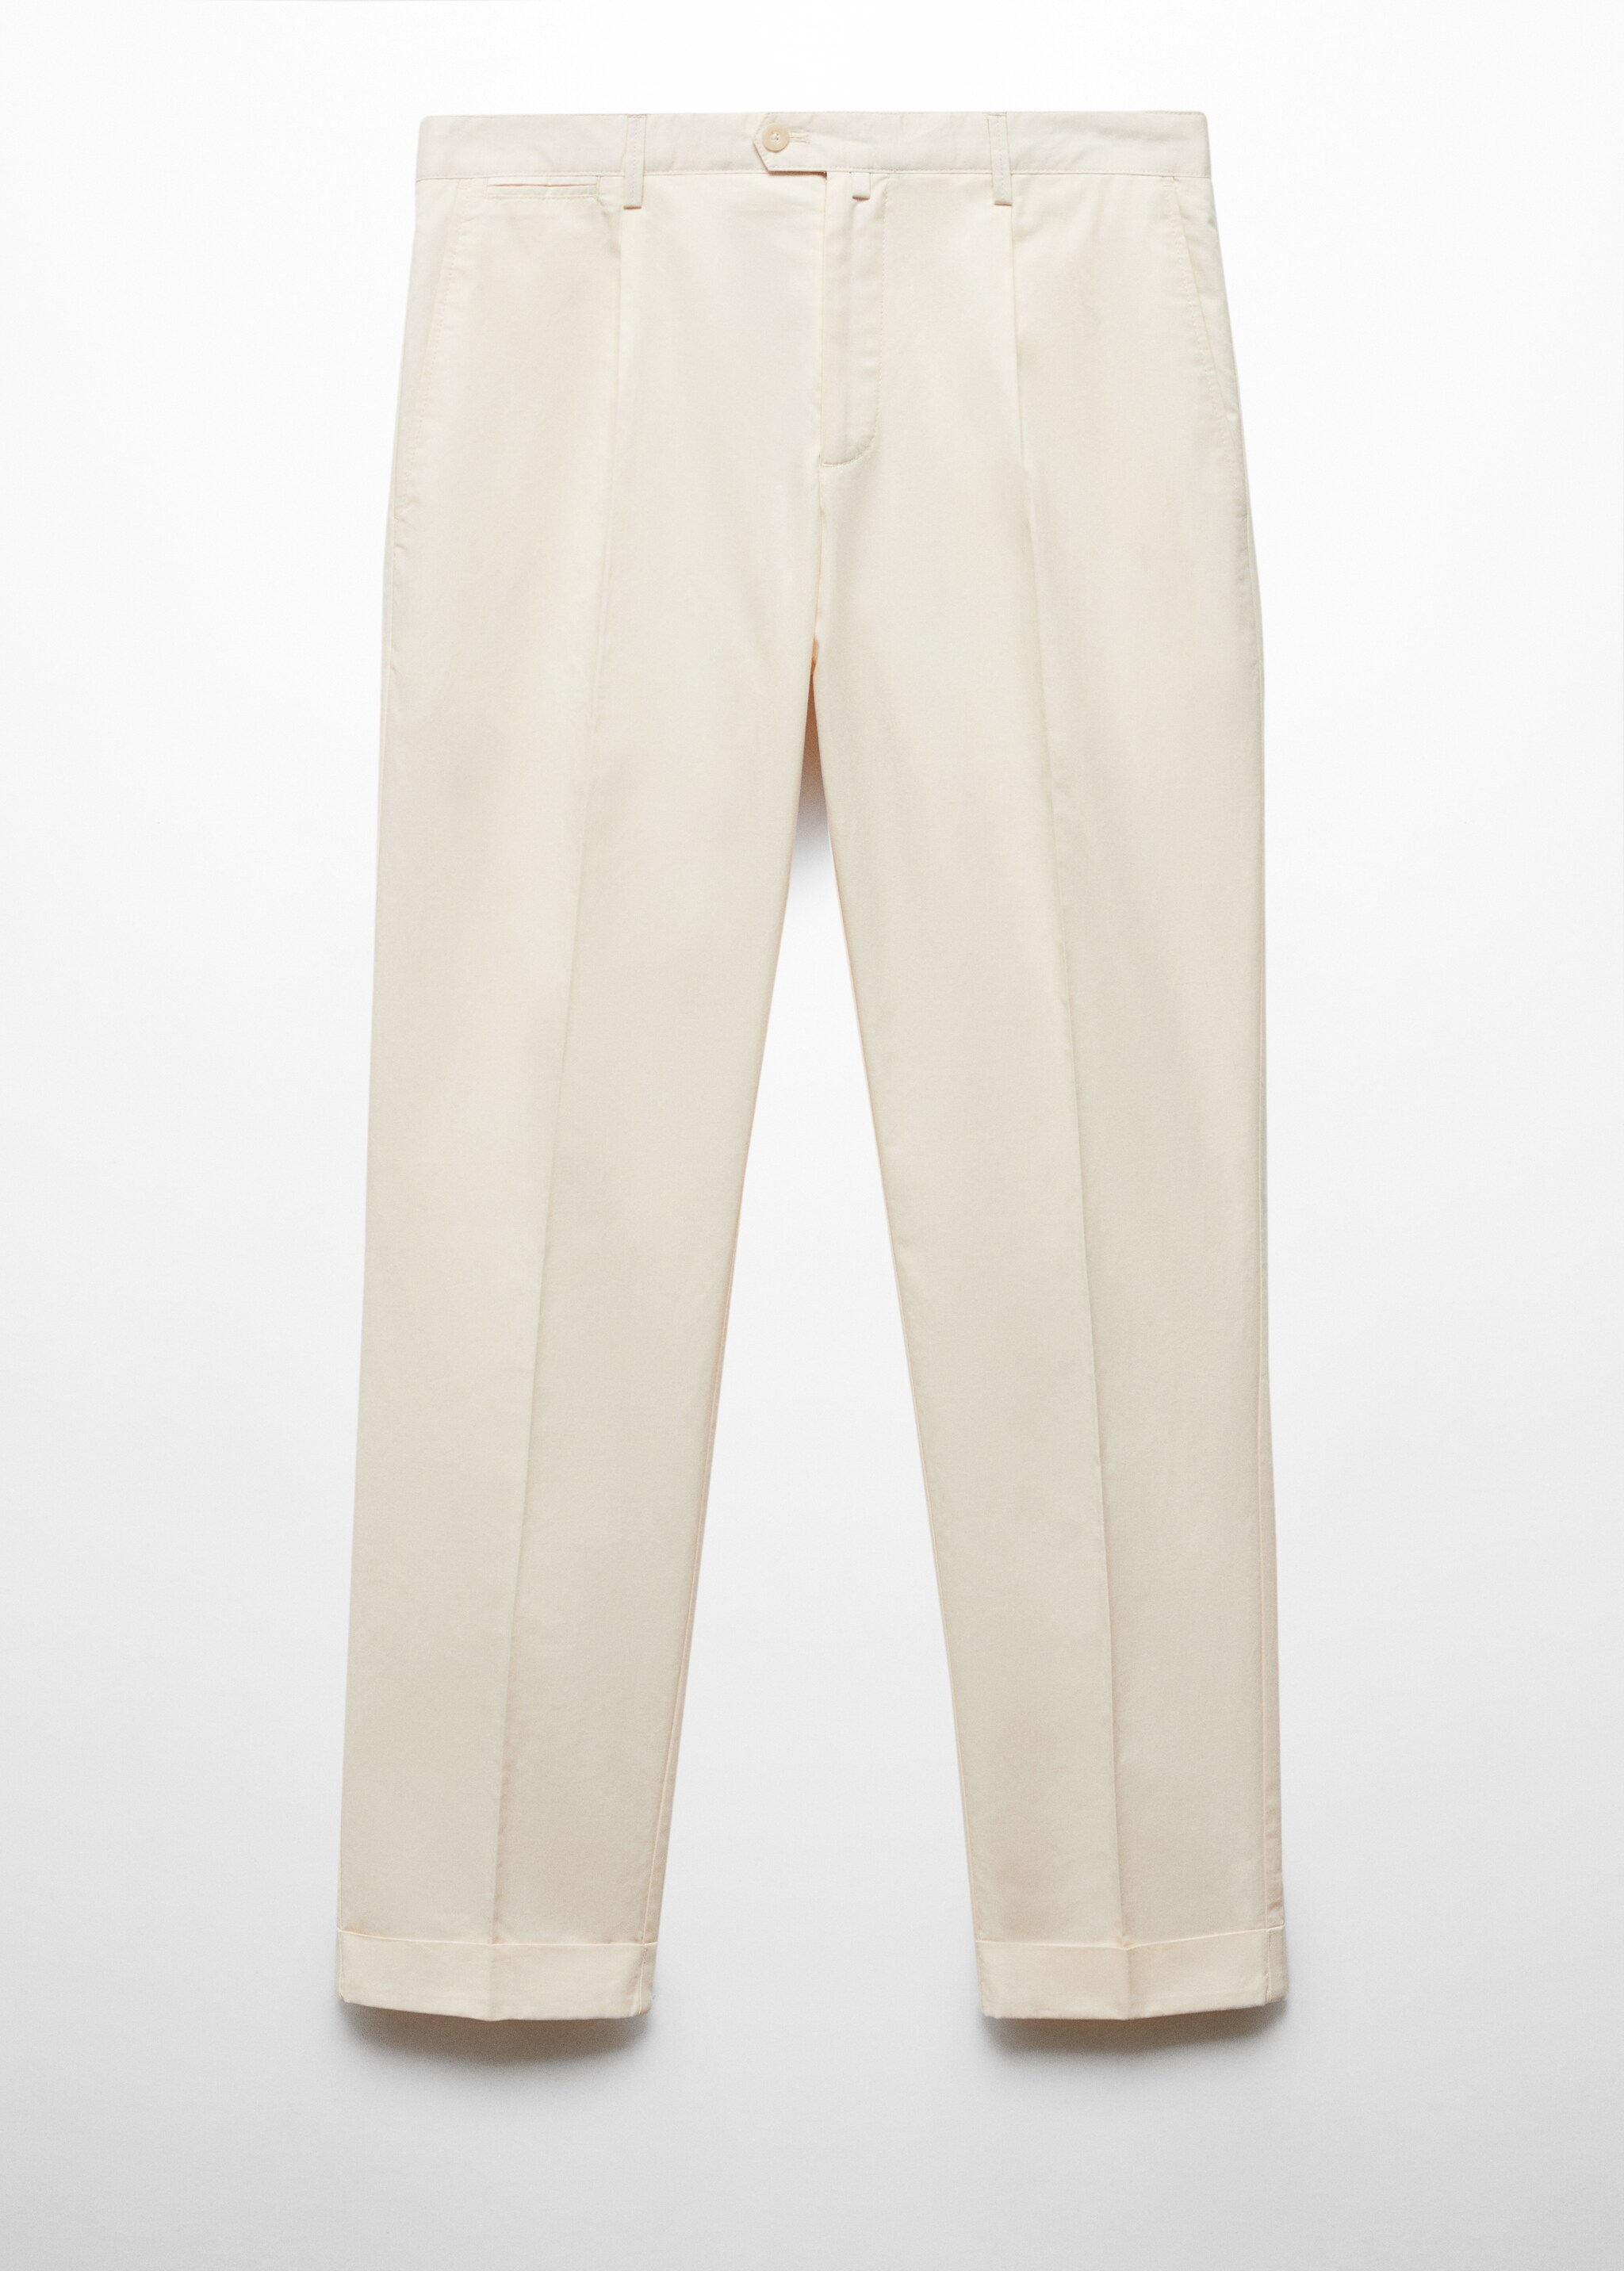 Cotton linen pleated trousers - Article without model